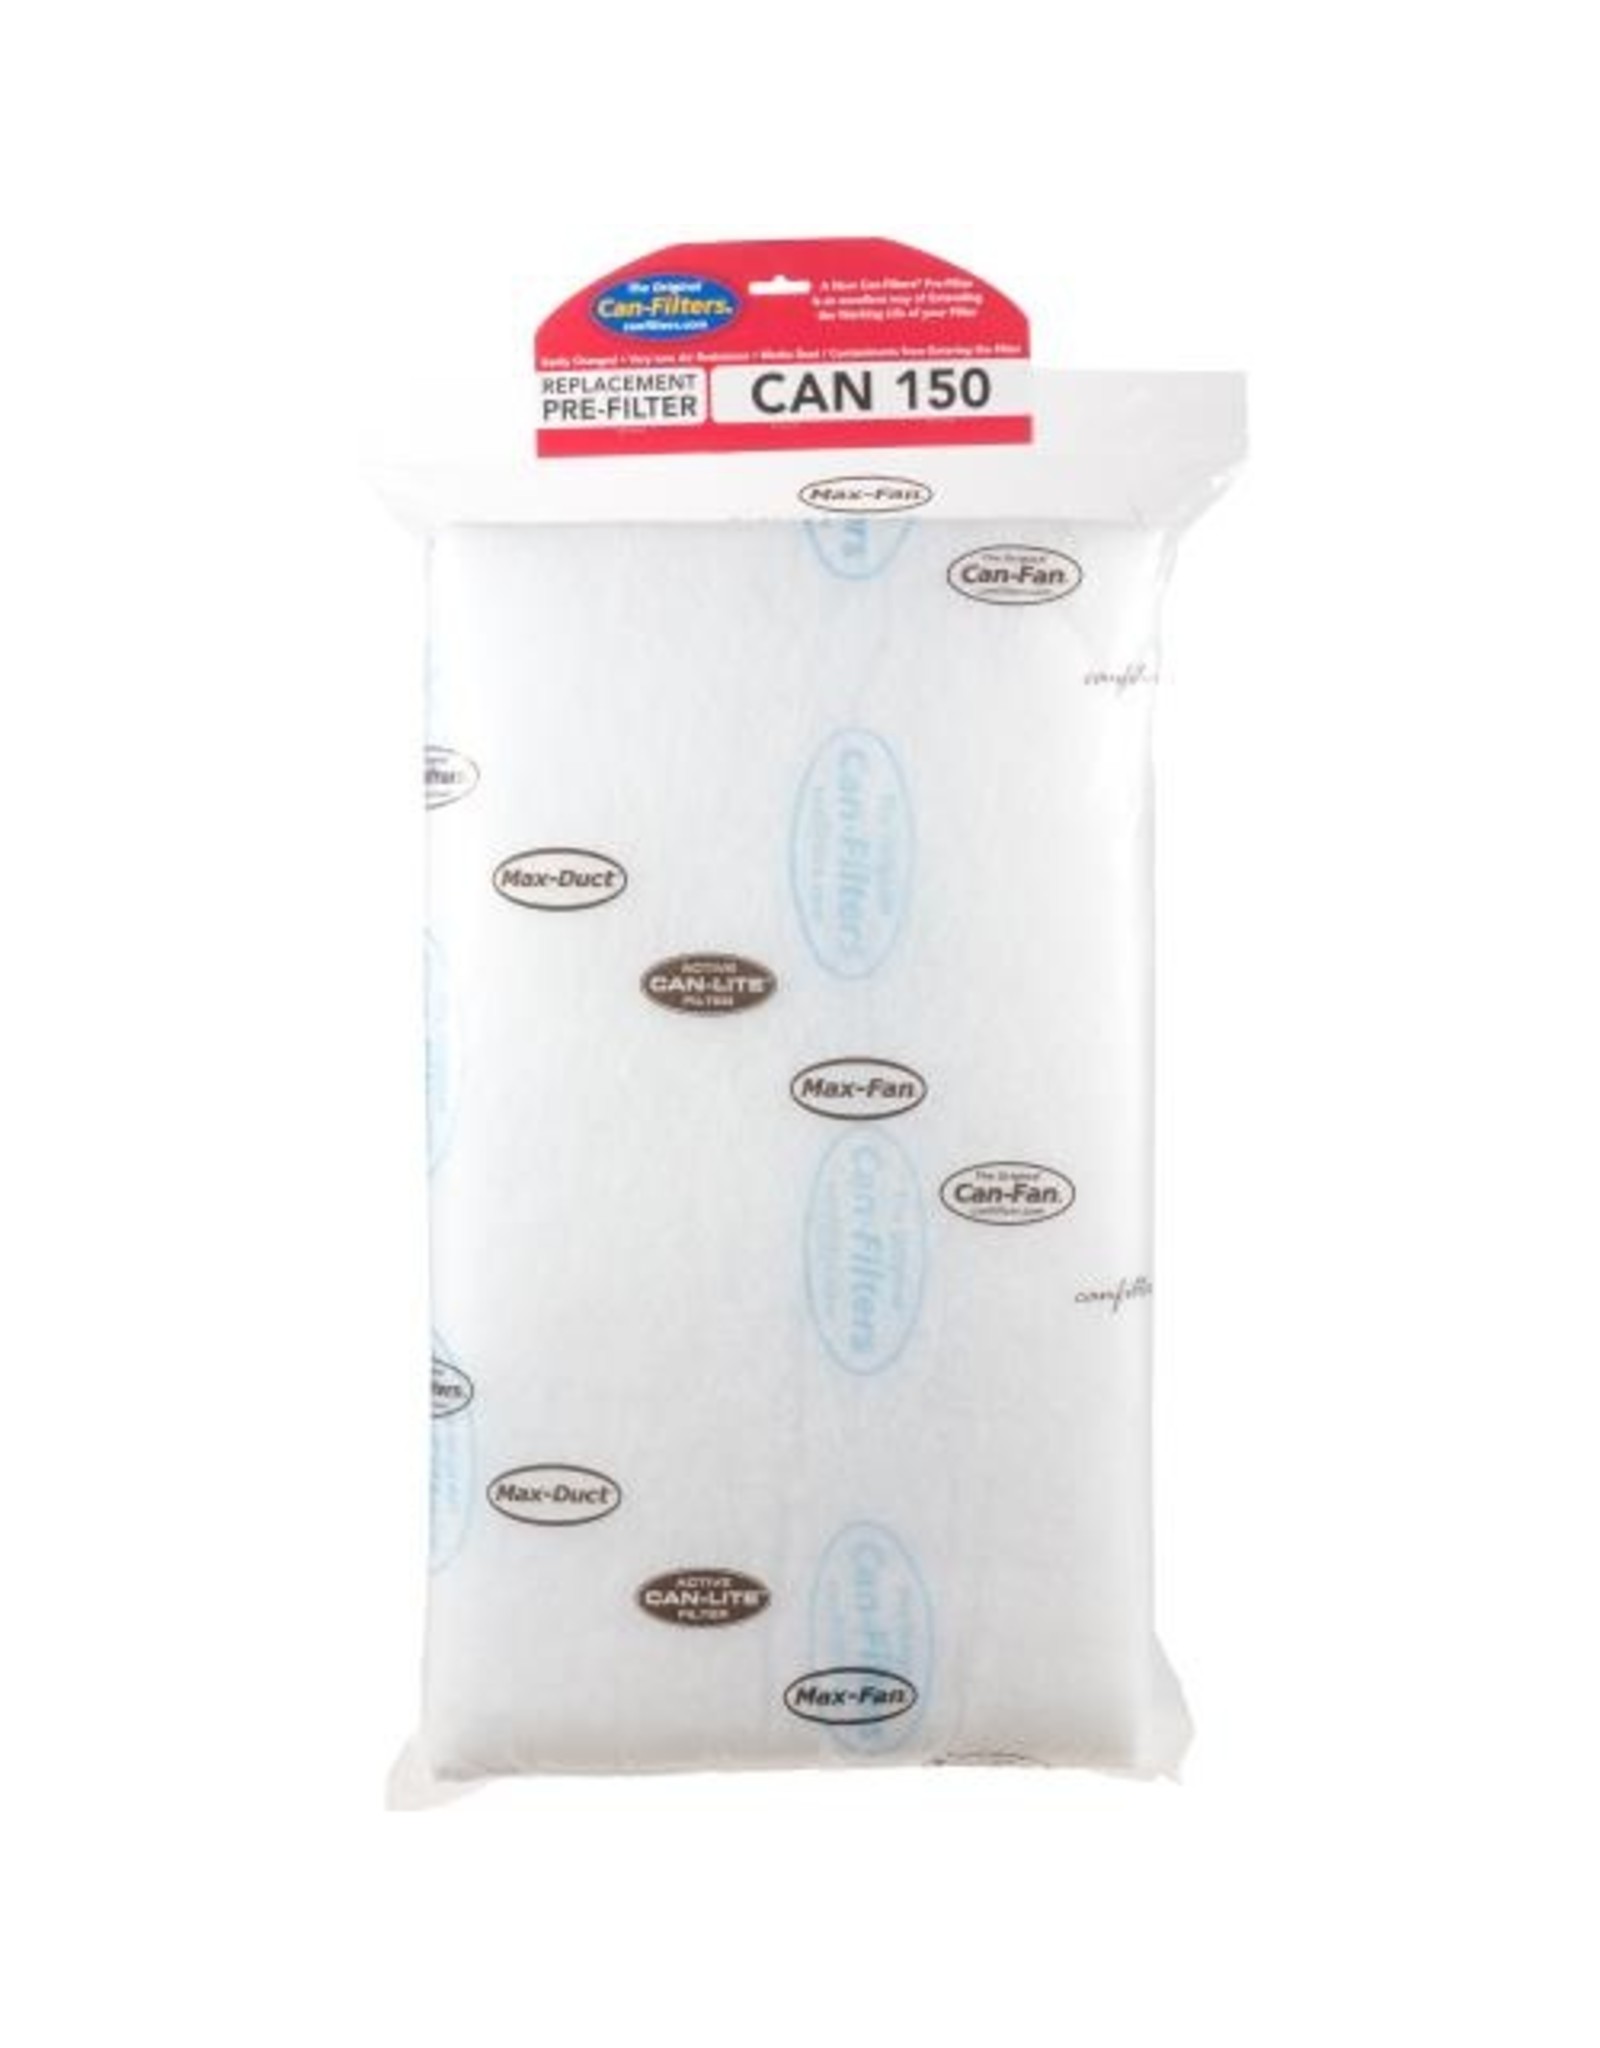 Can-Fan Can 150 Pre-Filter Wrap